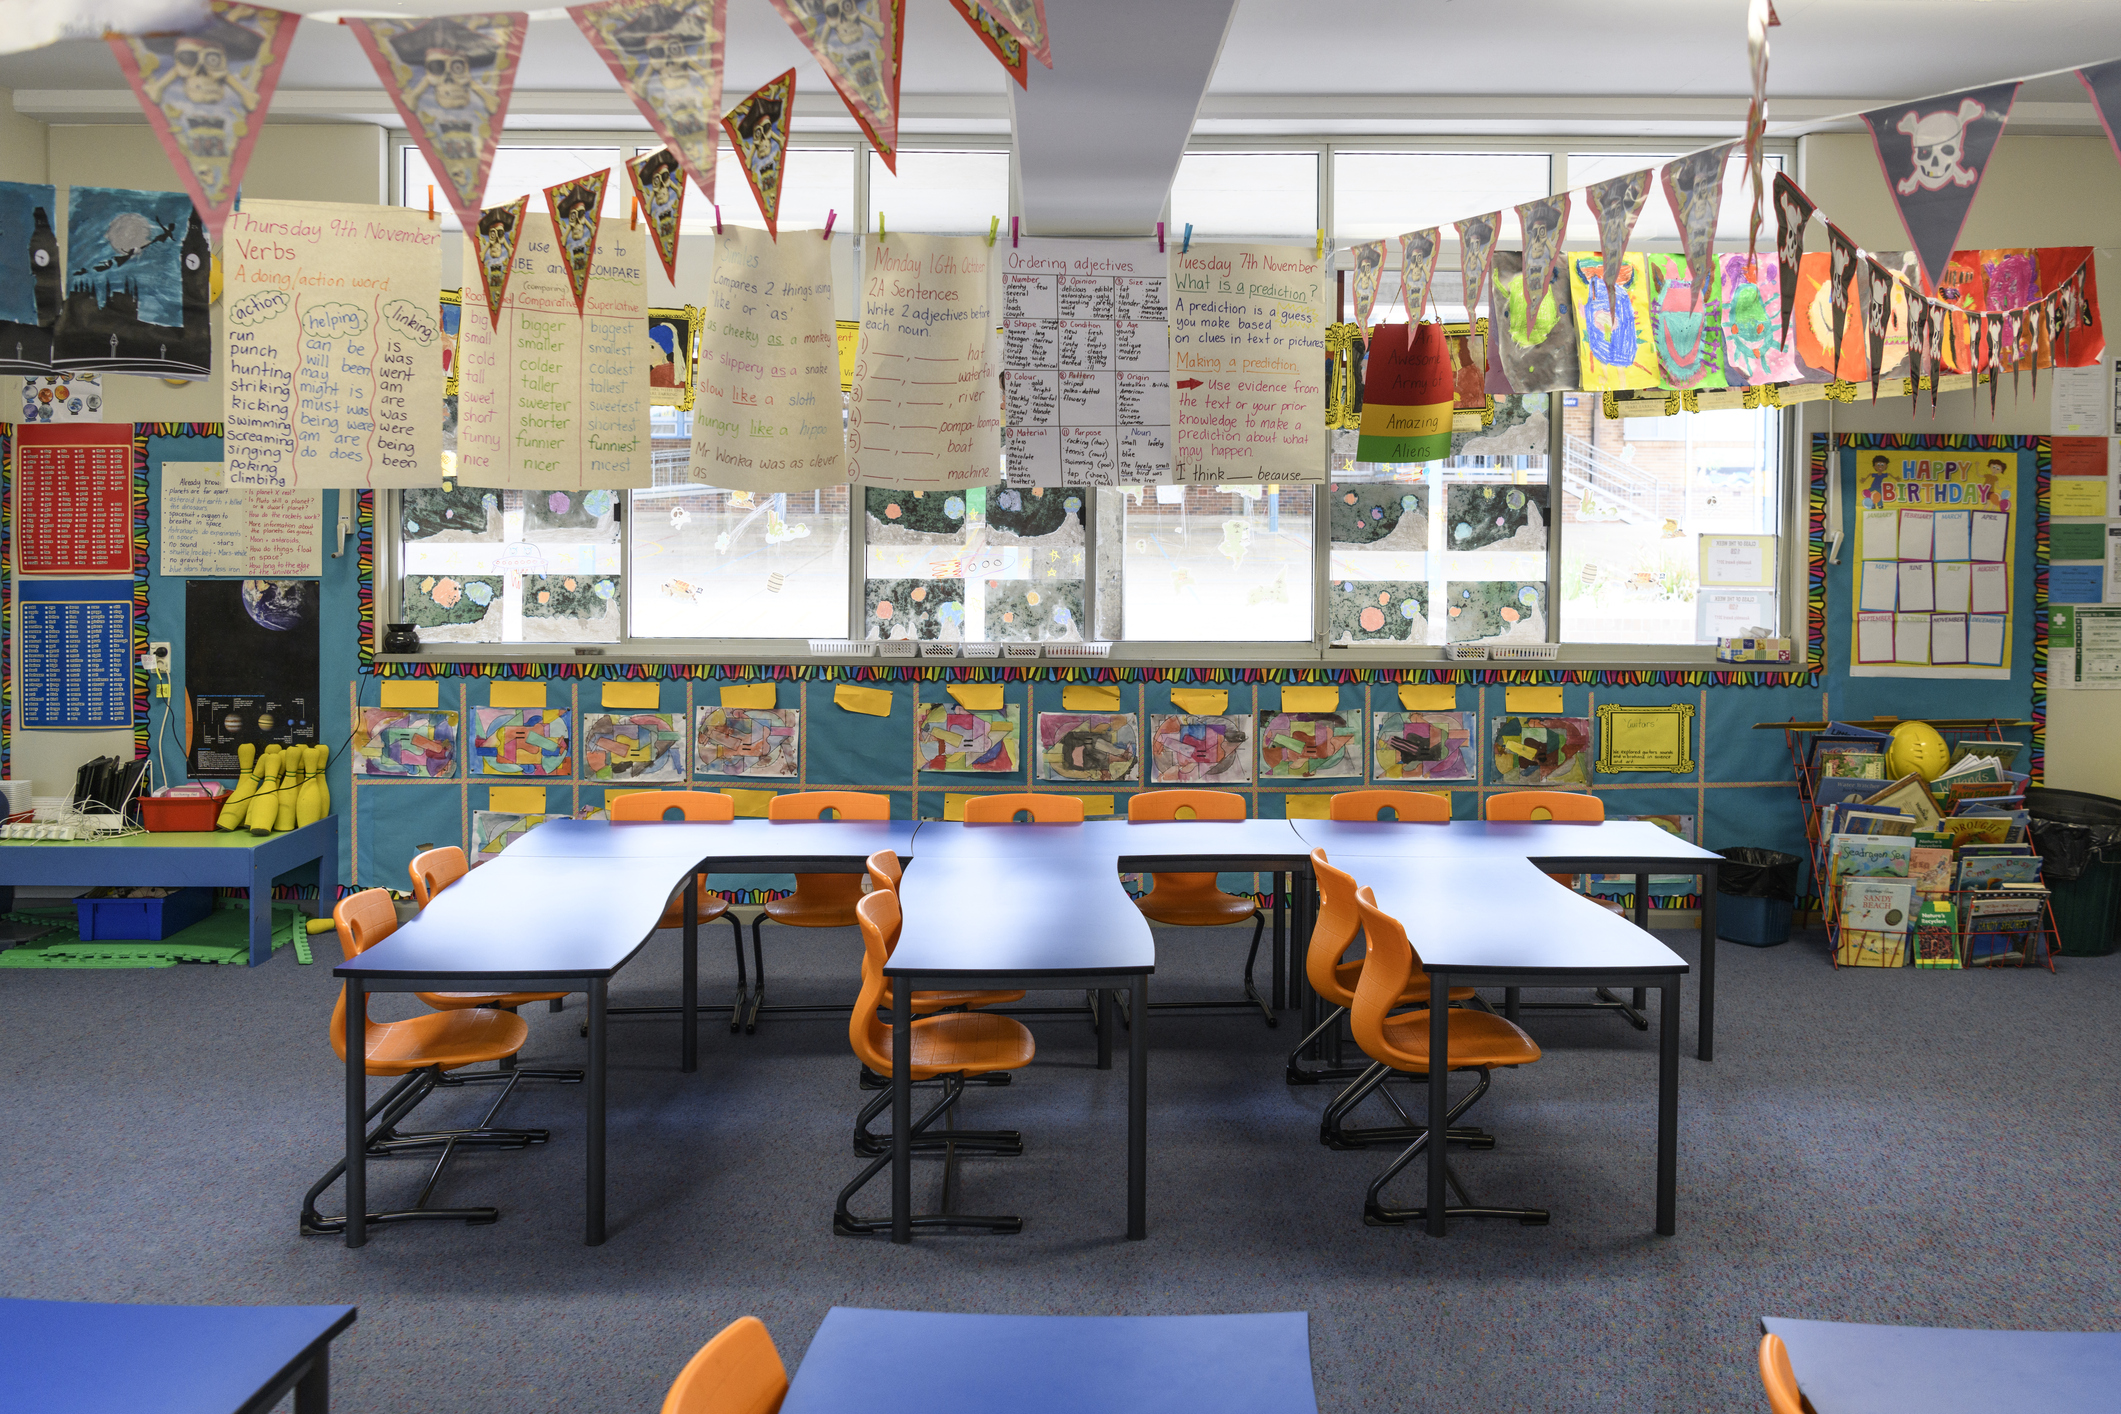 heavily-decorated-classrooms-disrupt-attention-and-learning-in-young